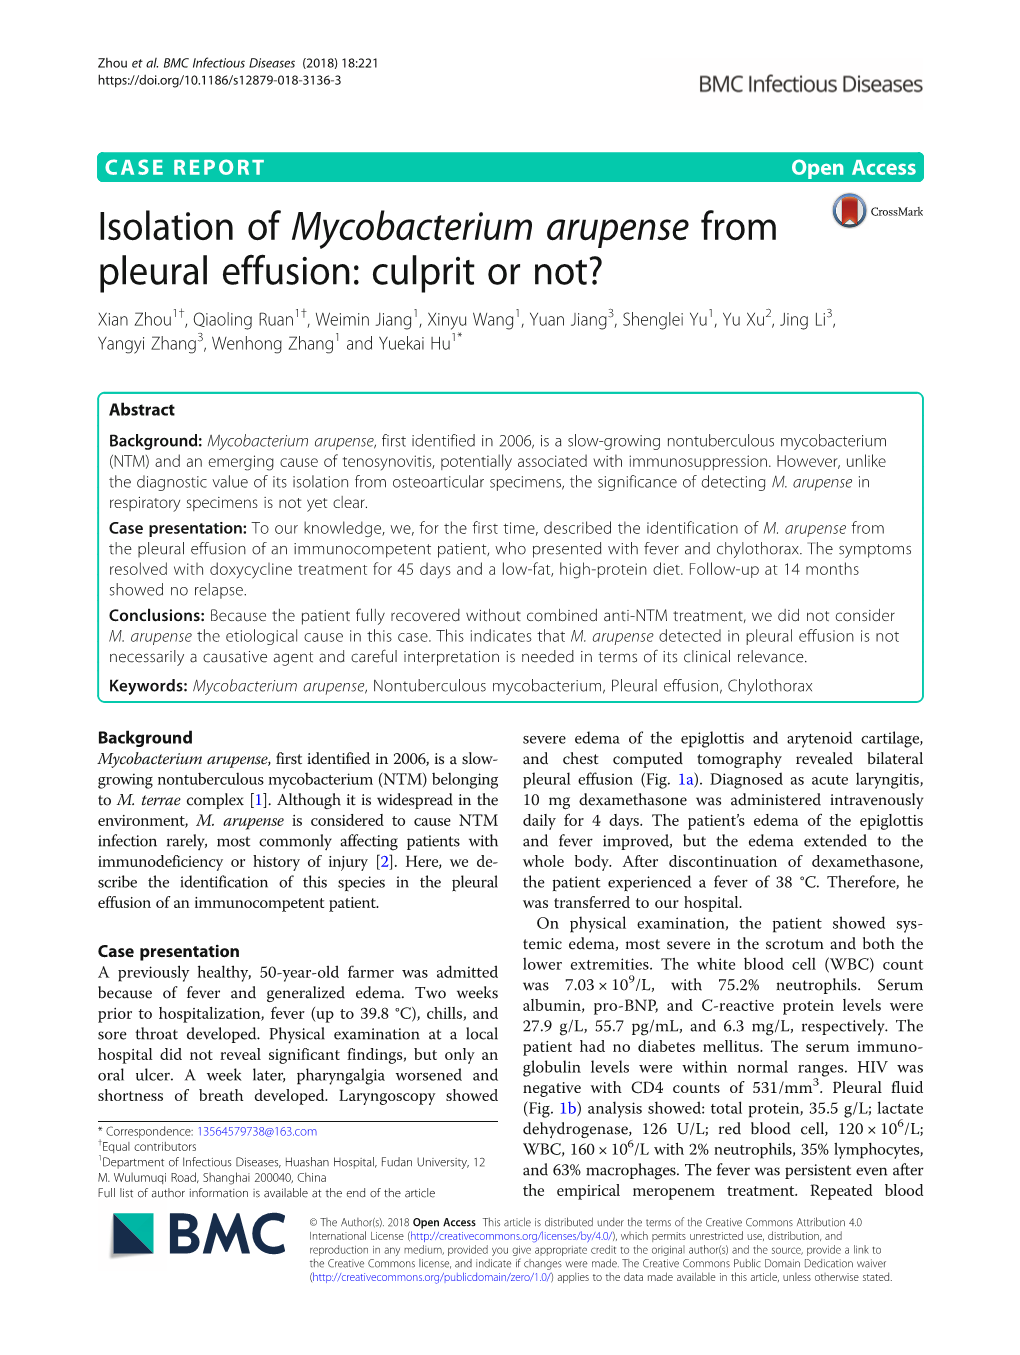 Isolation of Mycobacterium Arupense From